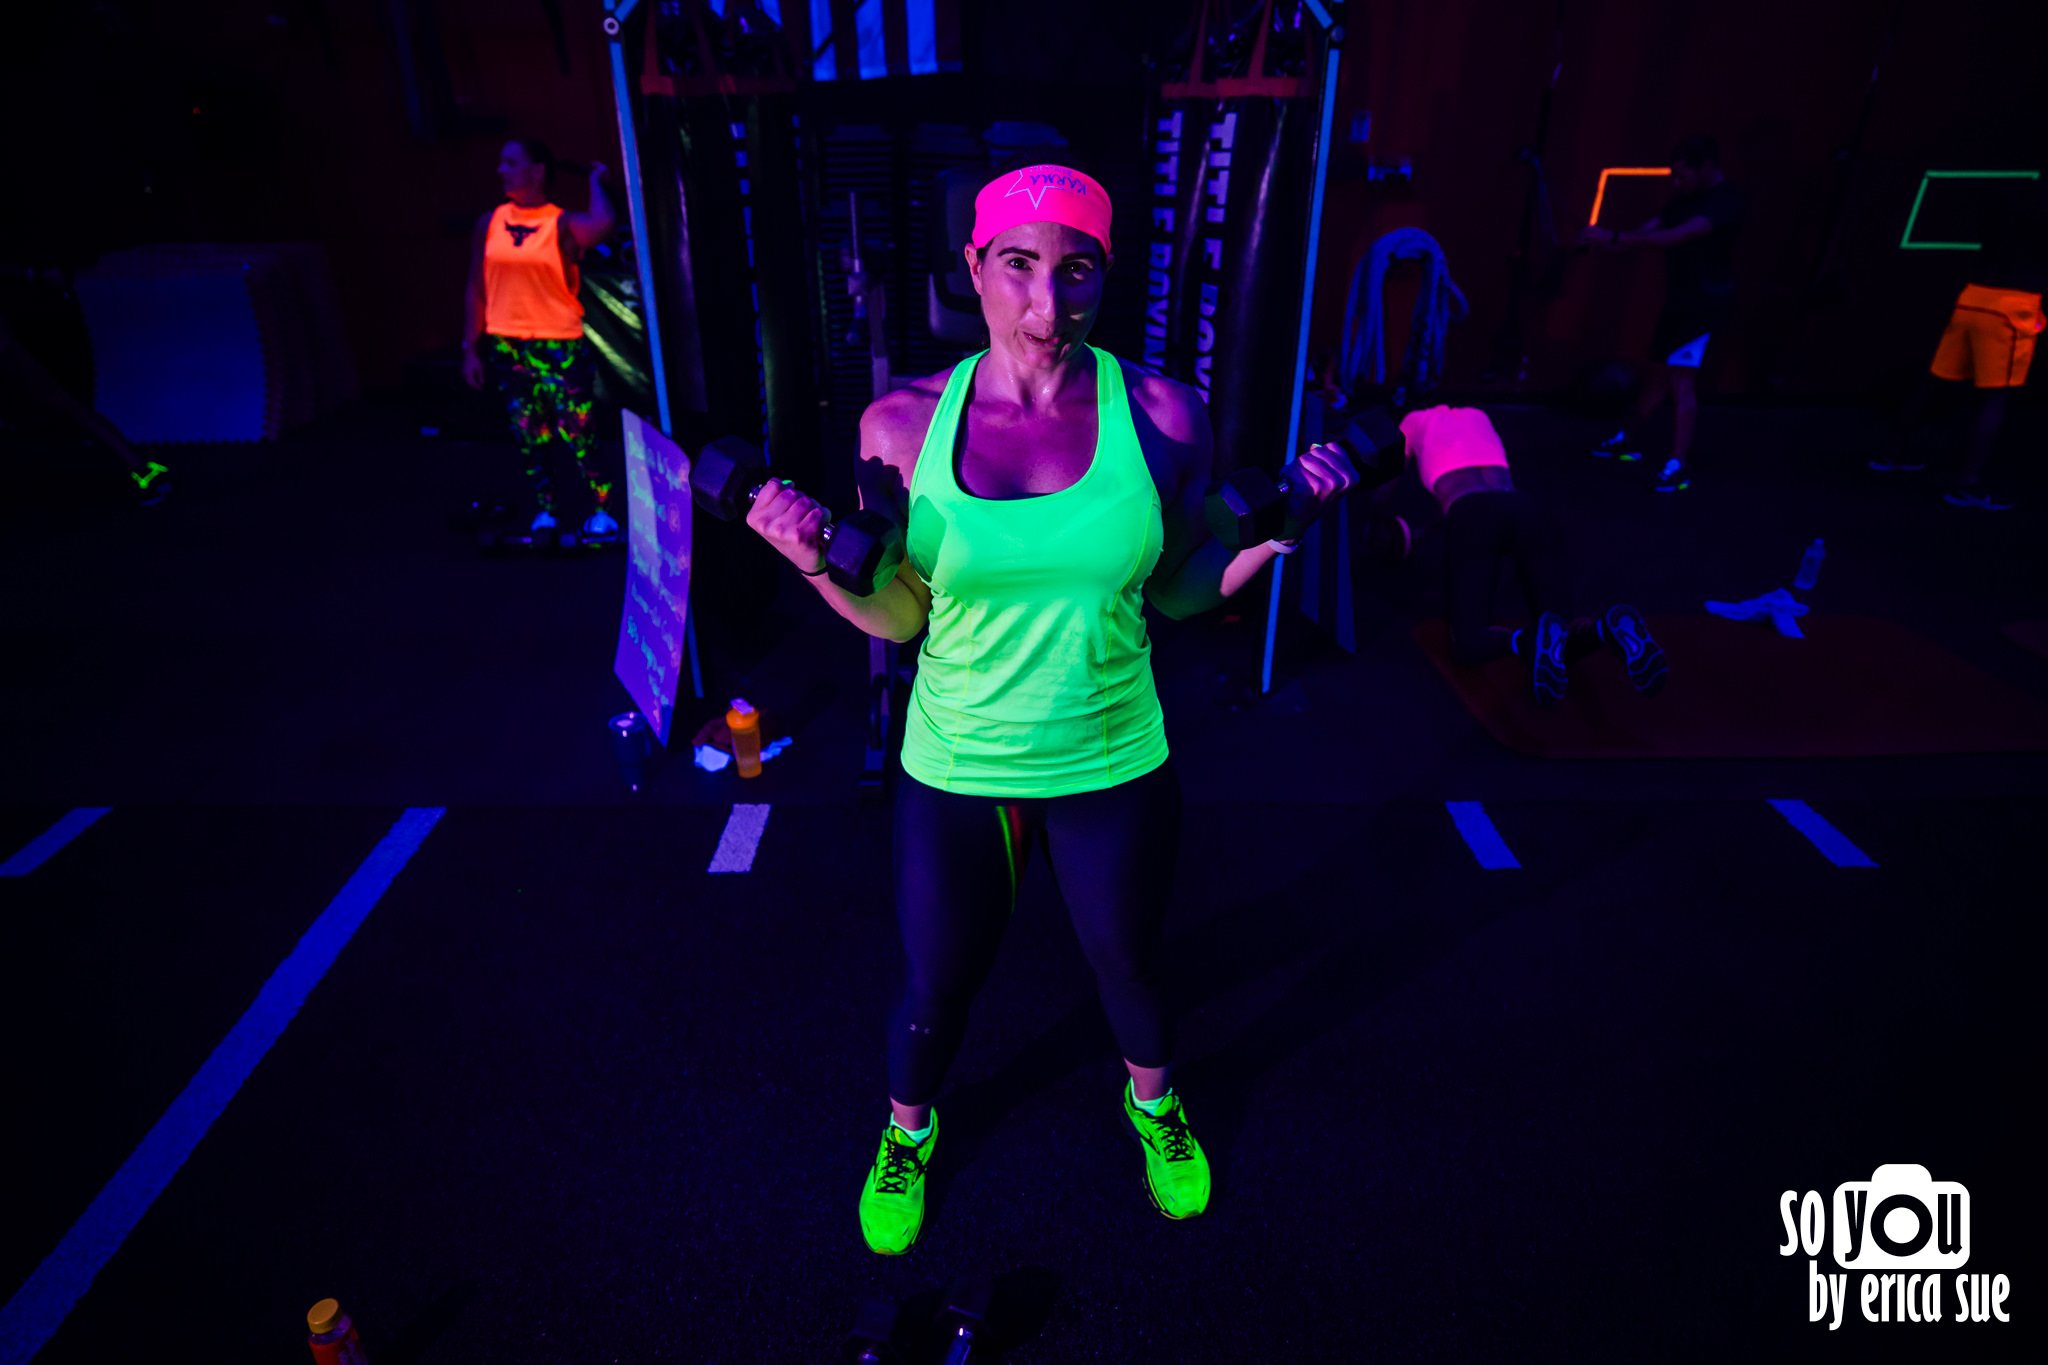 12-challenge-fitness-ft-lauderdale-glow-workout-fri-night-lights-so-you-by-erica-sue-davie-photographer-ES3_6326.jpg